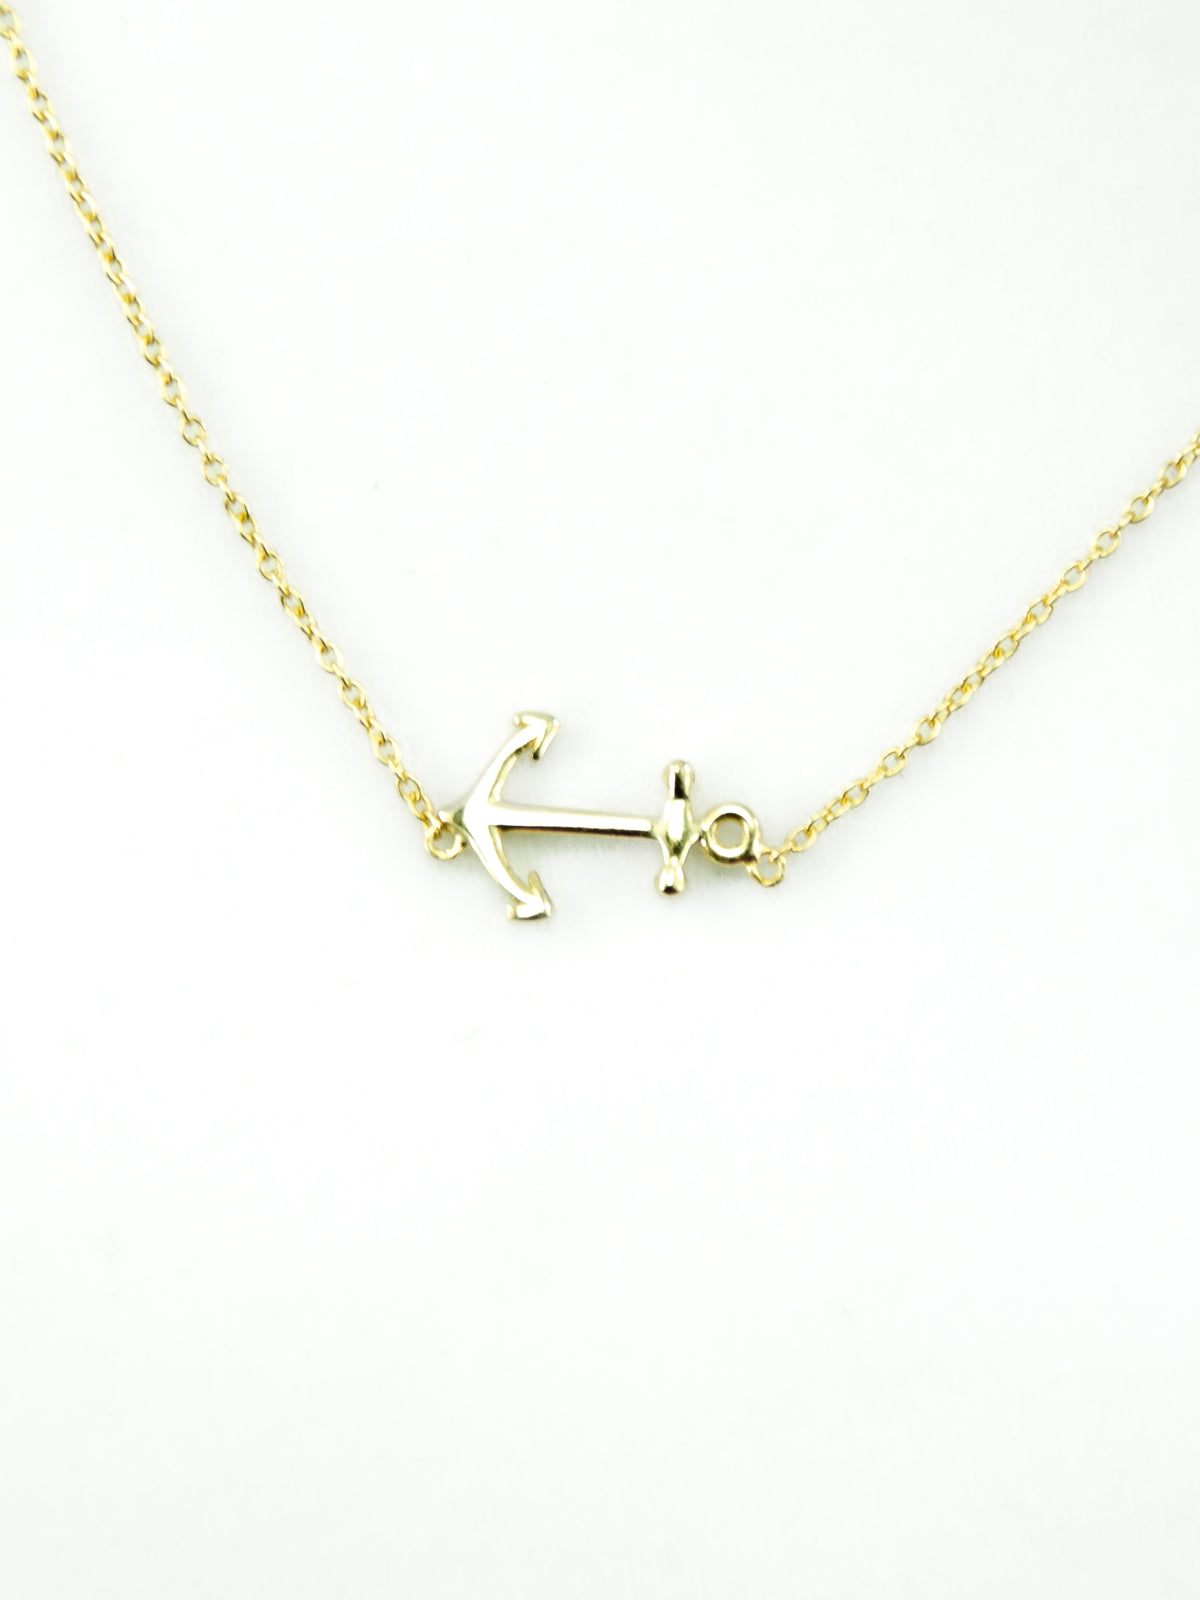 24K Gold Anchor Charm Pendant on Sterling Silver 925 Delicate Chain